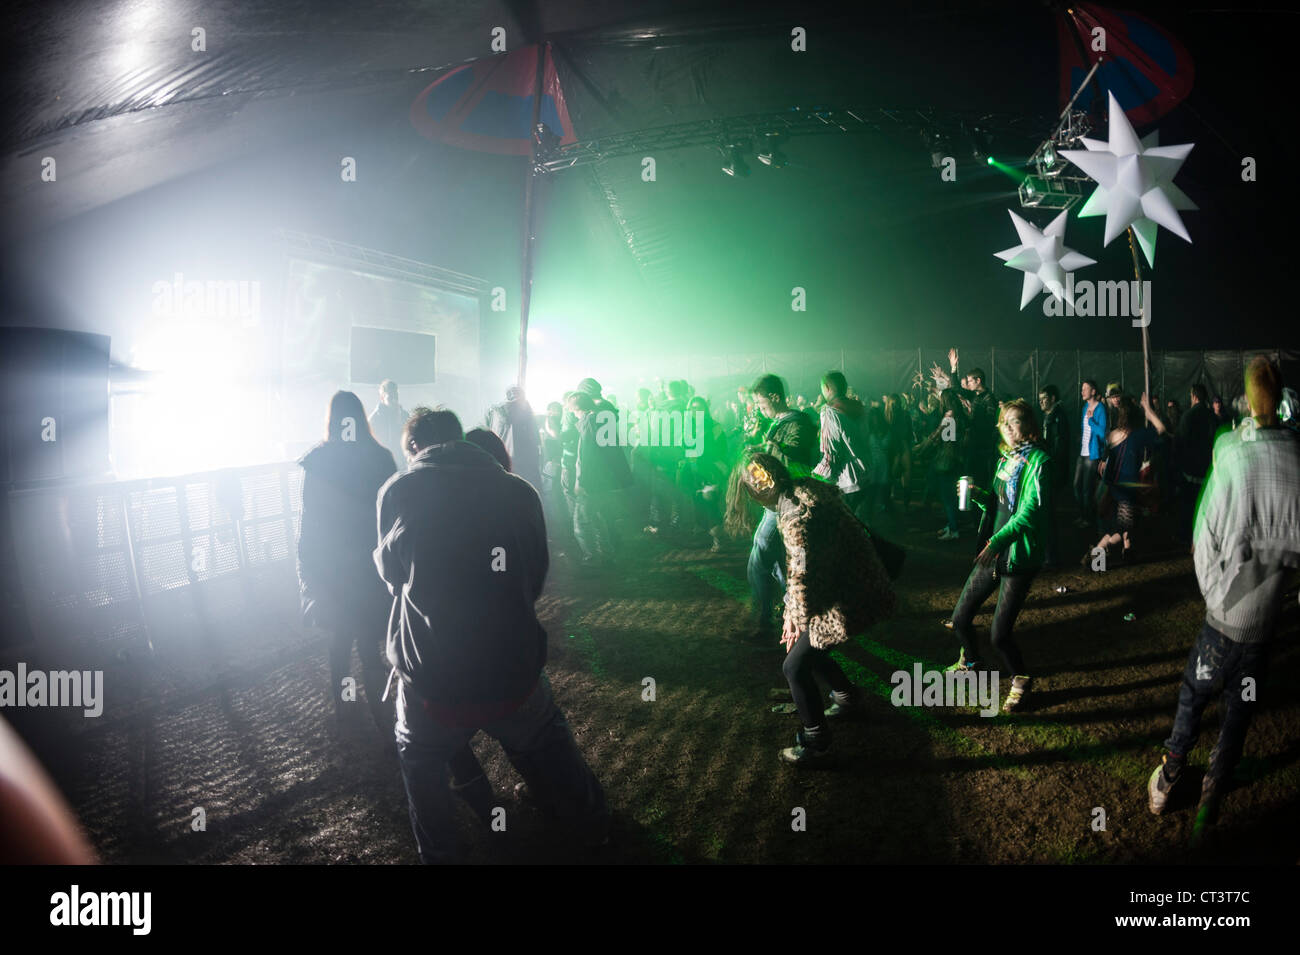 People dancing at The Rare One music dance party event festival, Wales UK Stock Photo